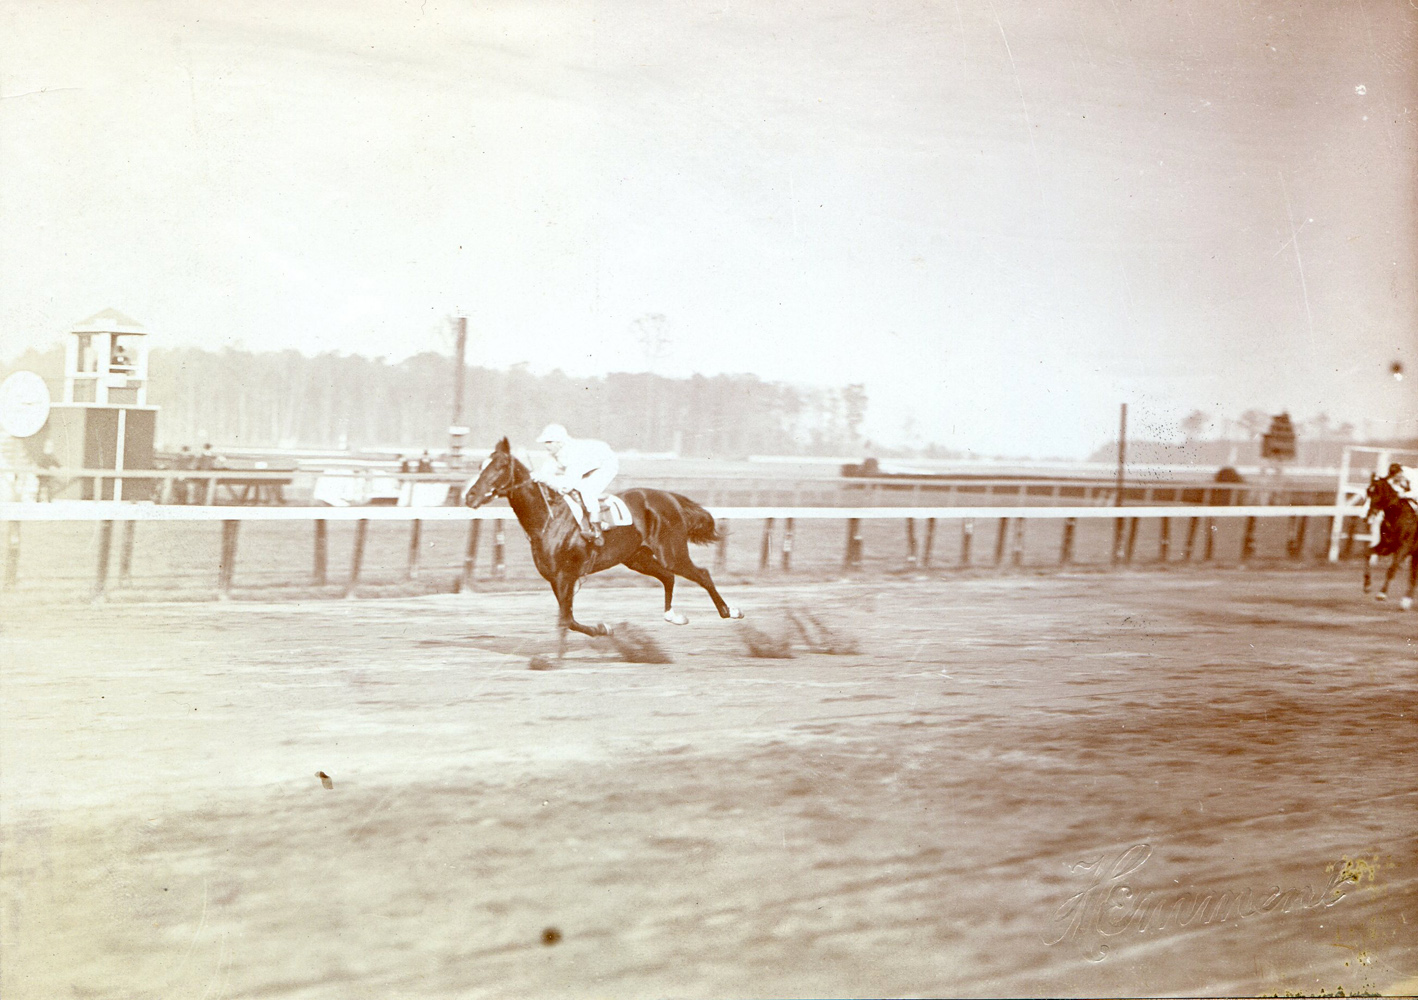 Colin (Walter Miller up) winning the 1907 National Stallion Stakes at Belmont Park (J. C. Hemment/Museum Collection)